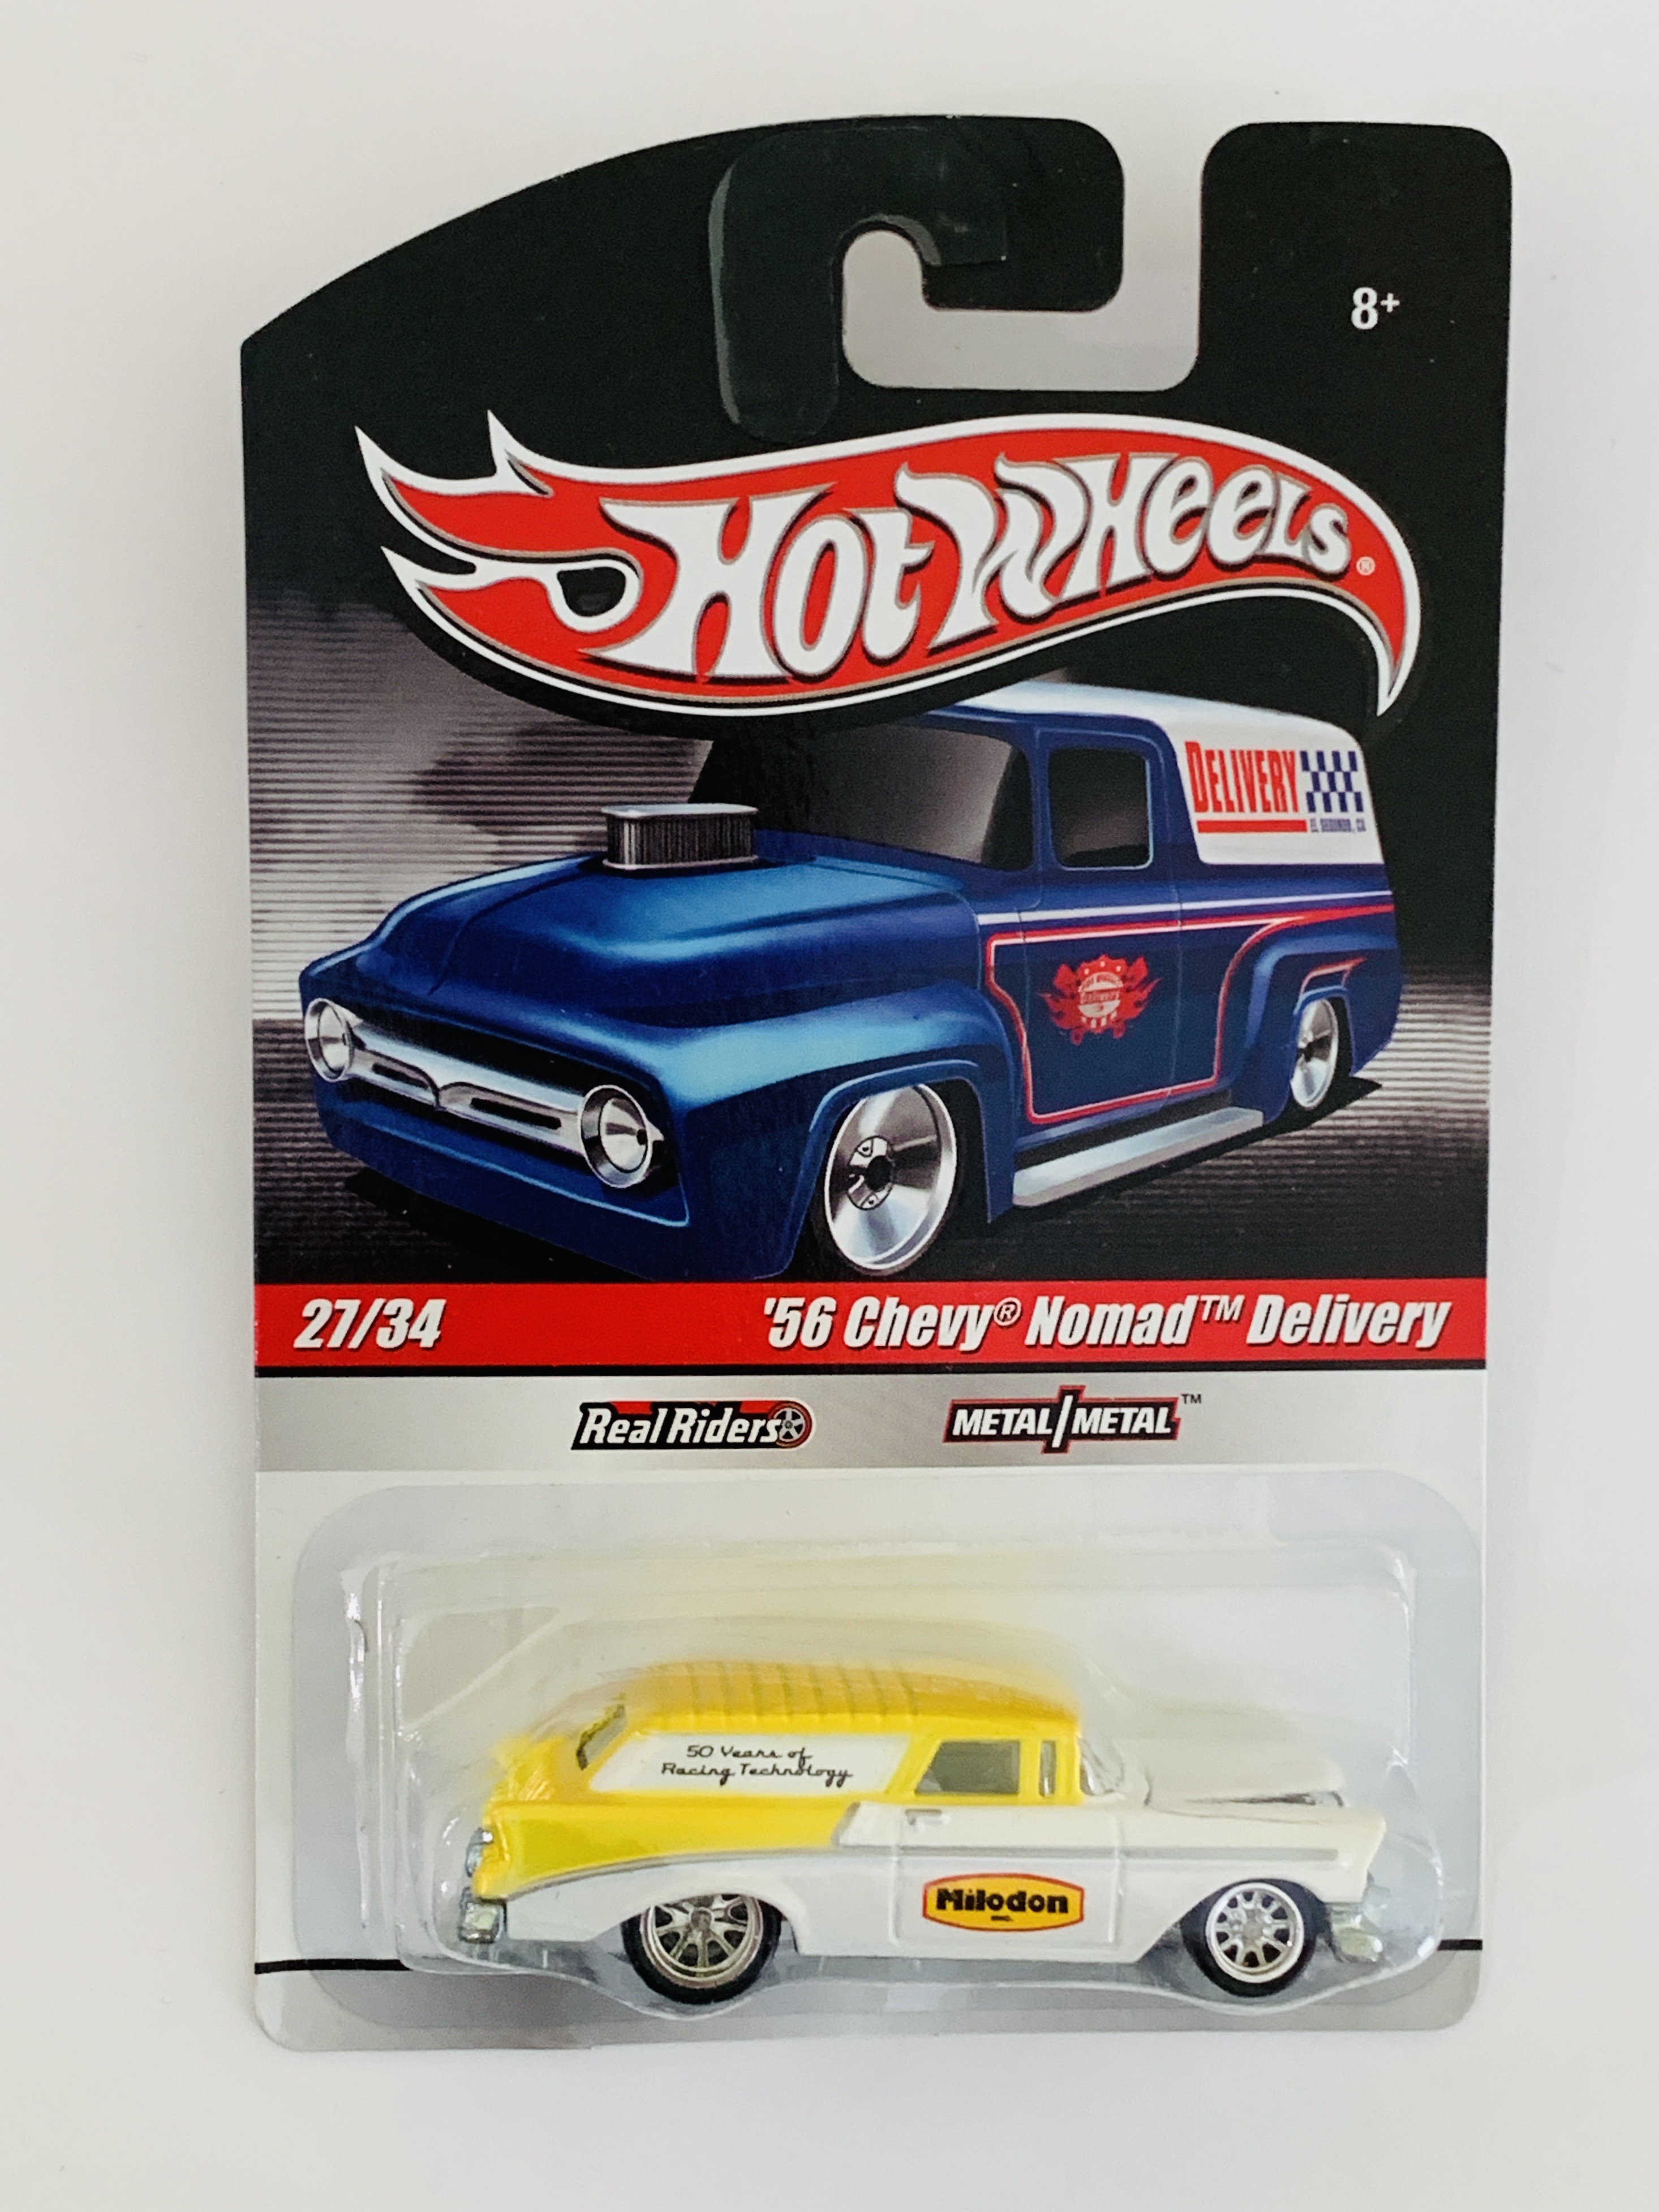 Hot Wheels Slick Rides Delivery '56 Chevy Nomad Delivery